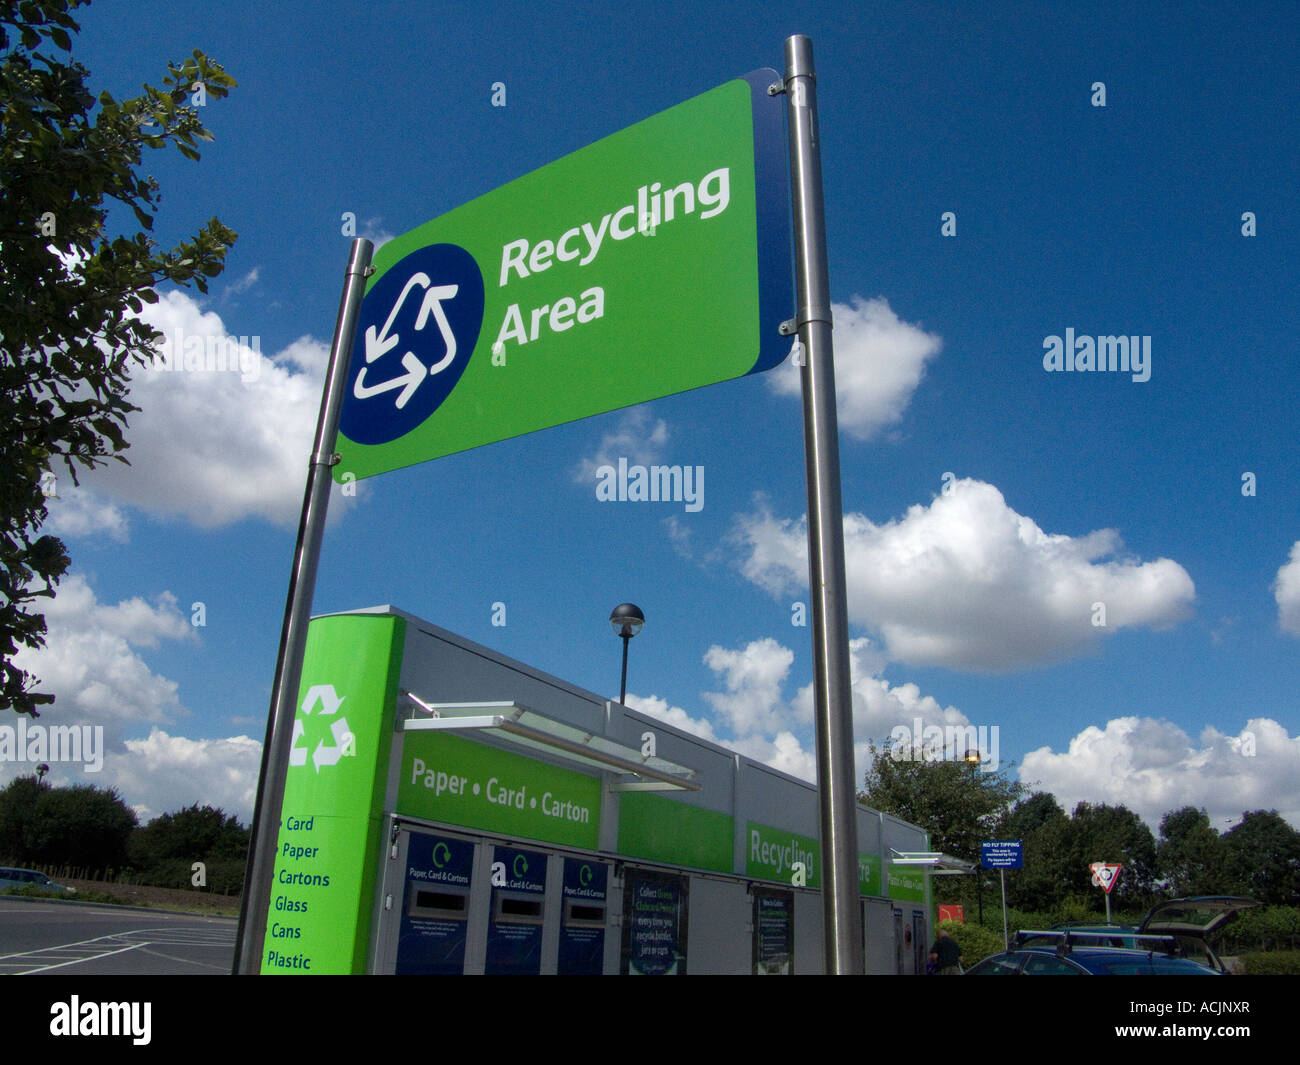 Recycling Area signs in a super market Stock Photo